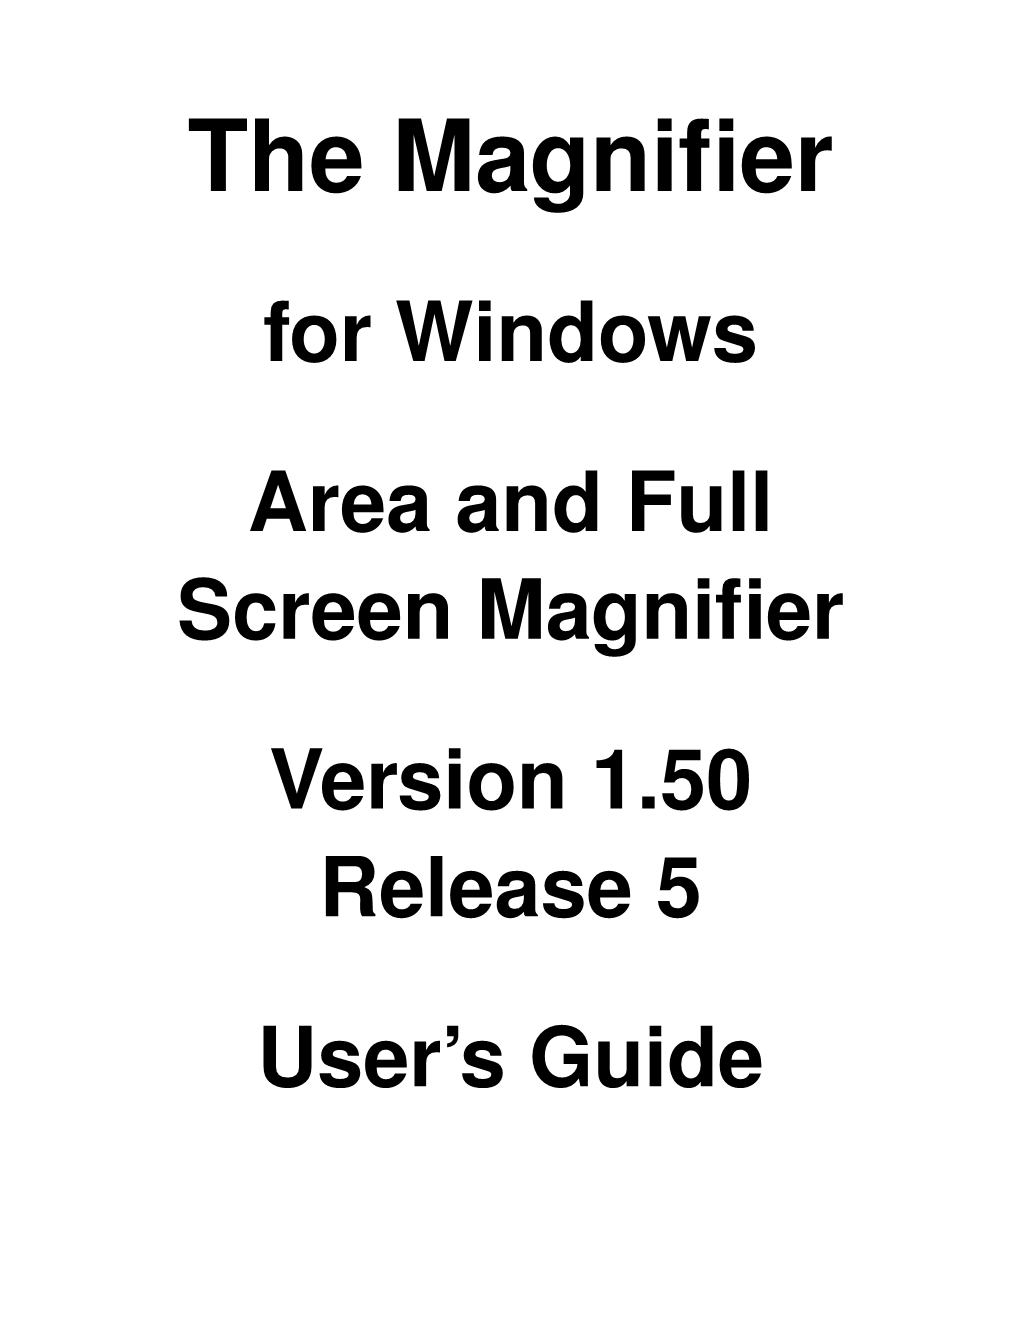 The Magnifier User's Guide